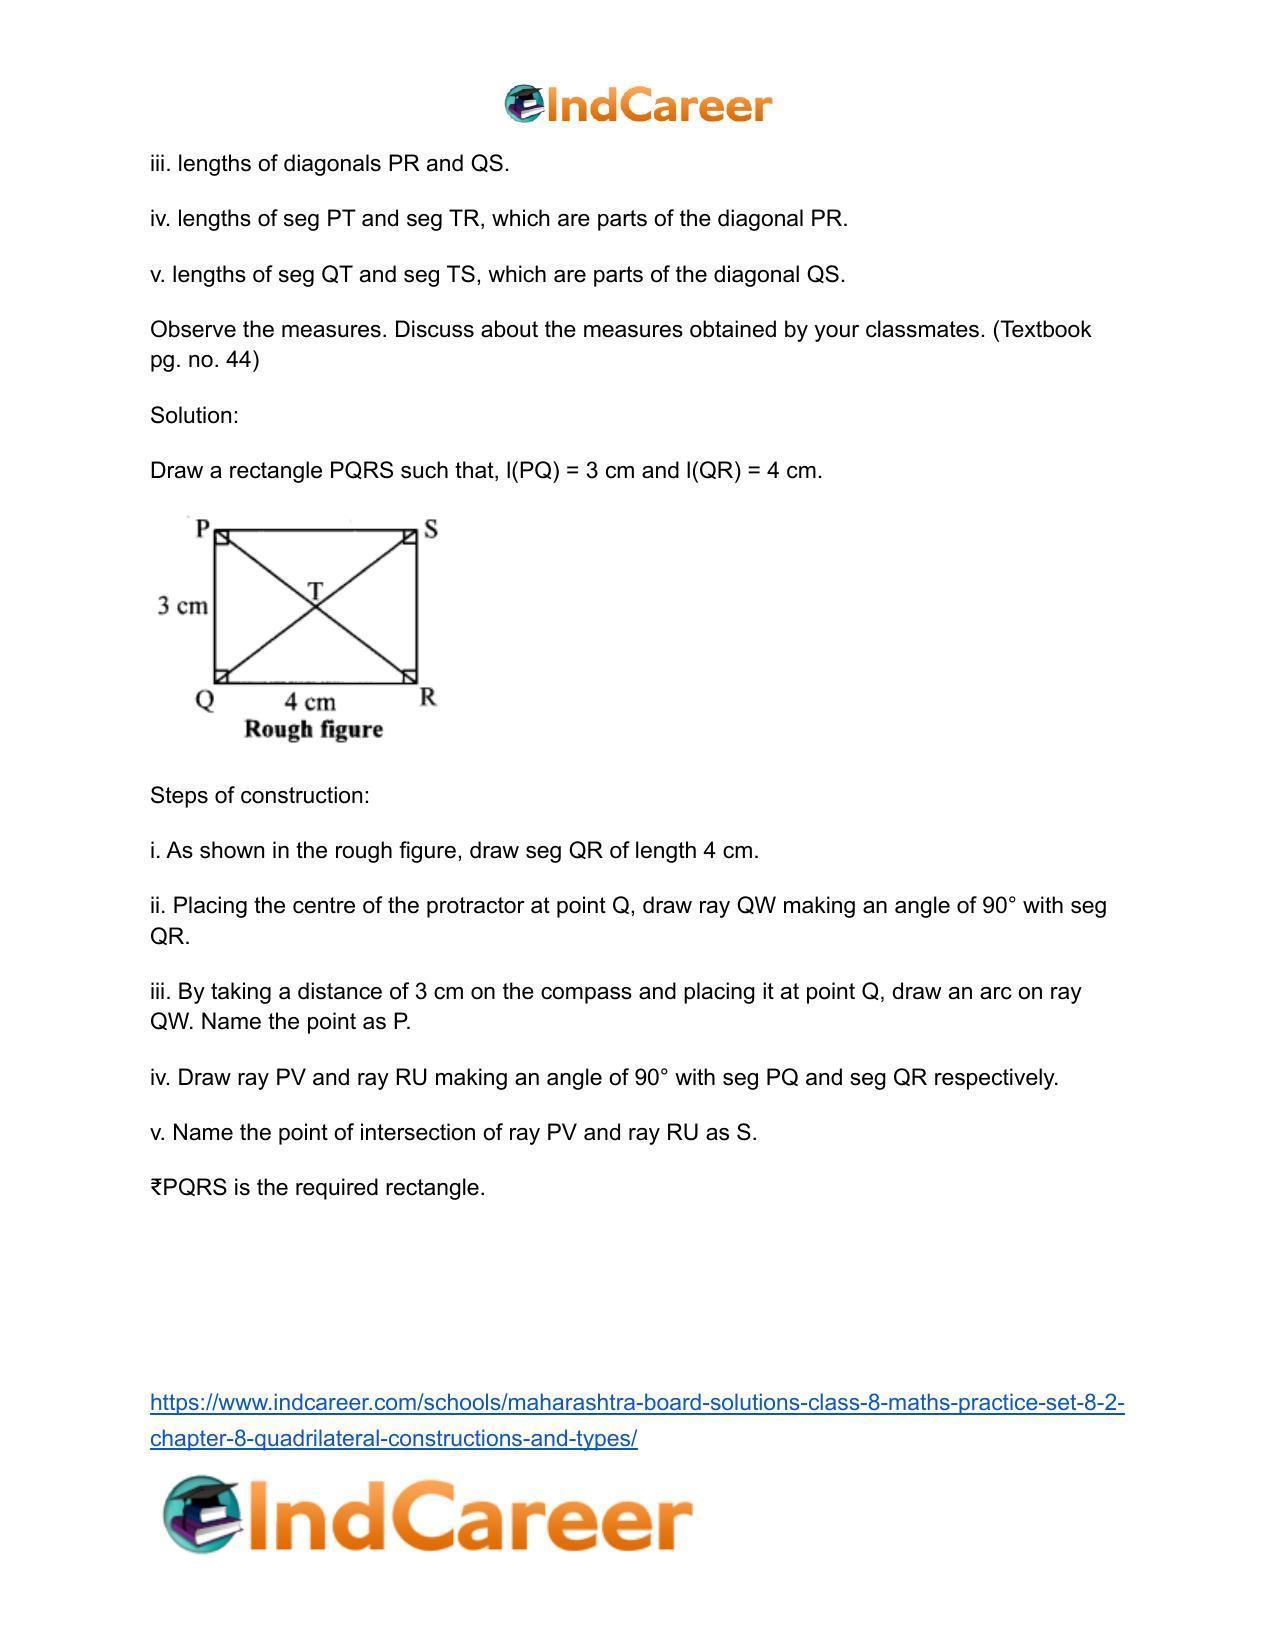 Maharashtra Board Solutions Class 8-Maths (Practice Set 8.2): Chapter 8- Quadrilateral: Constructions and Types - Page 11